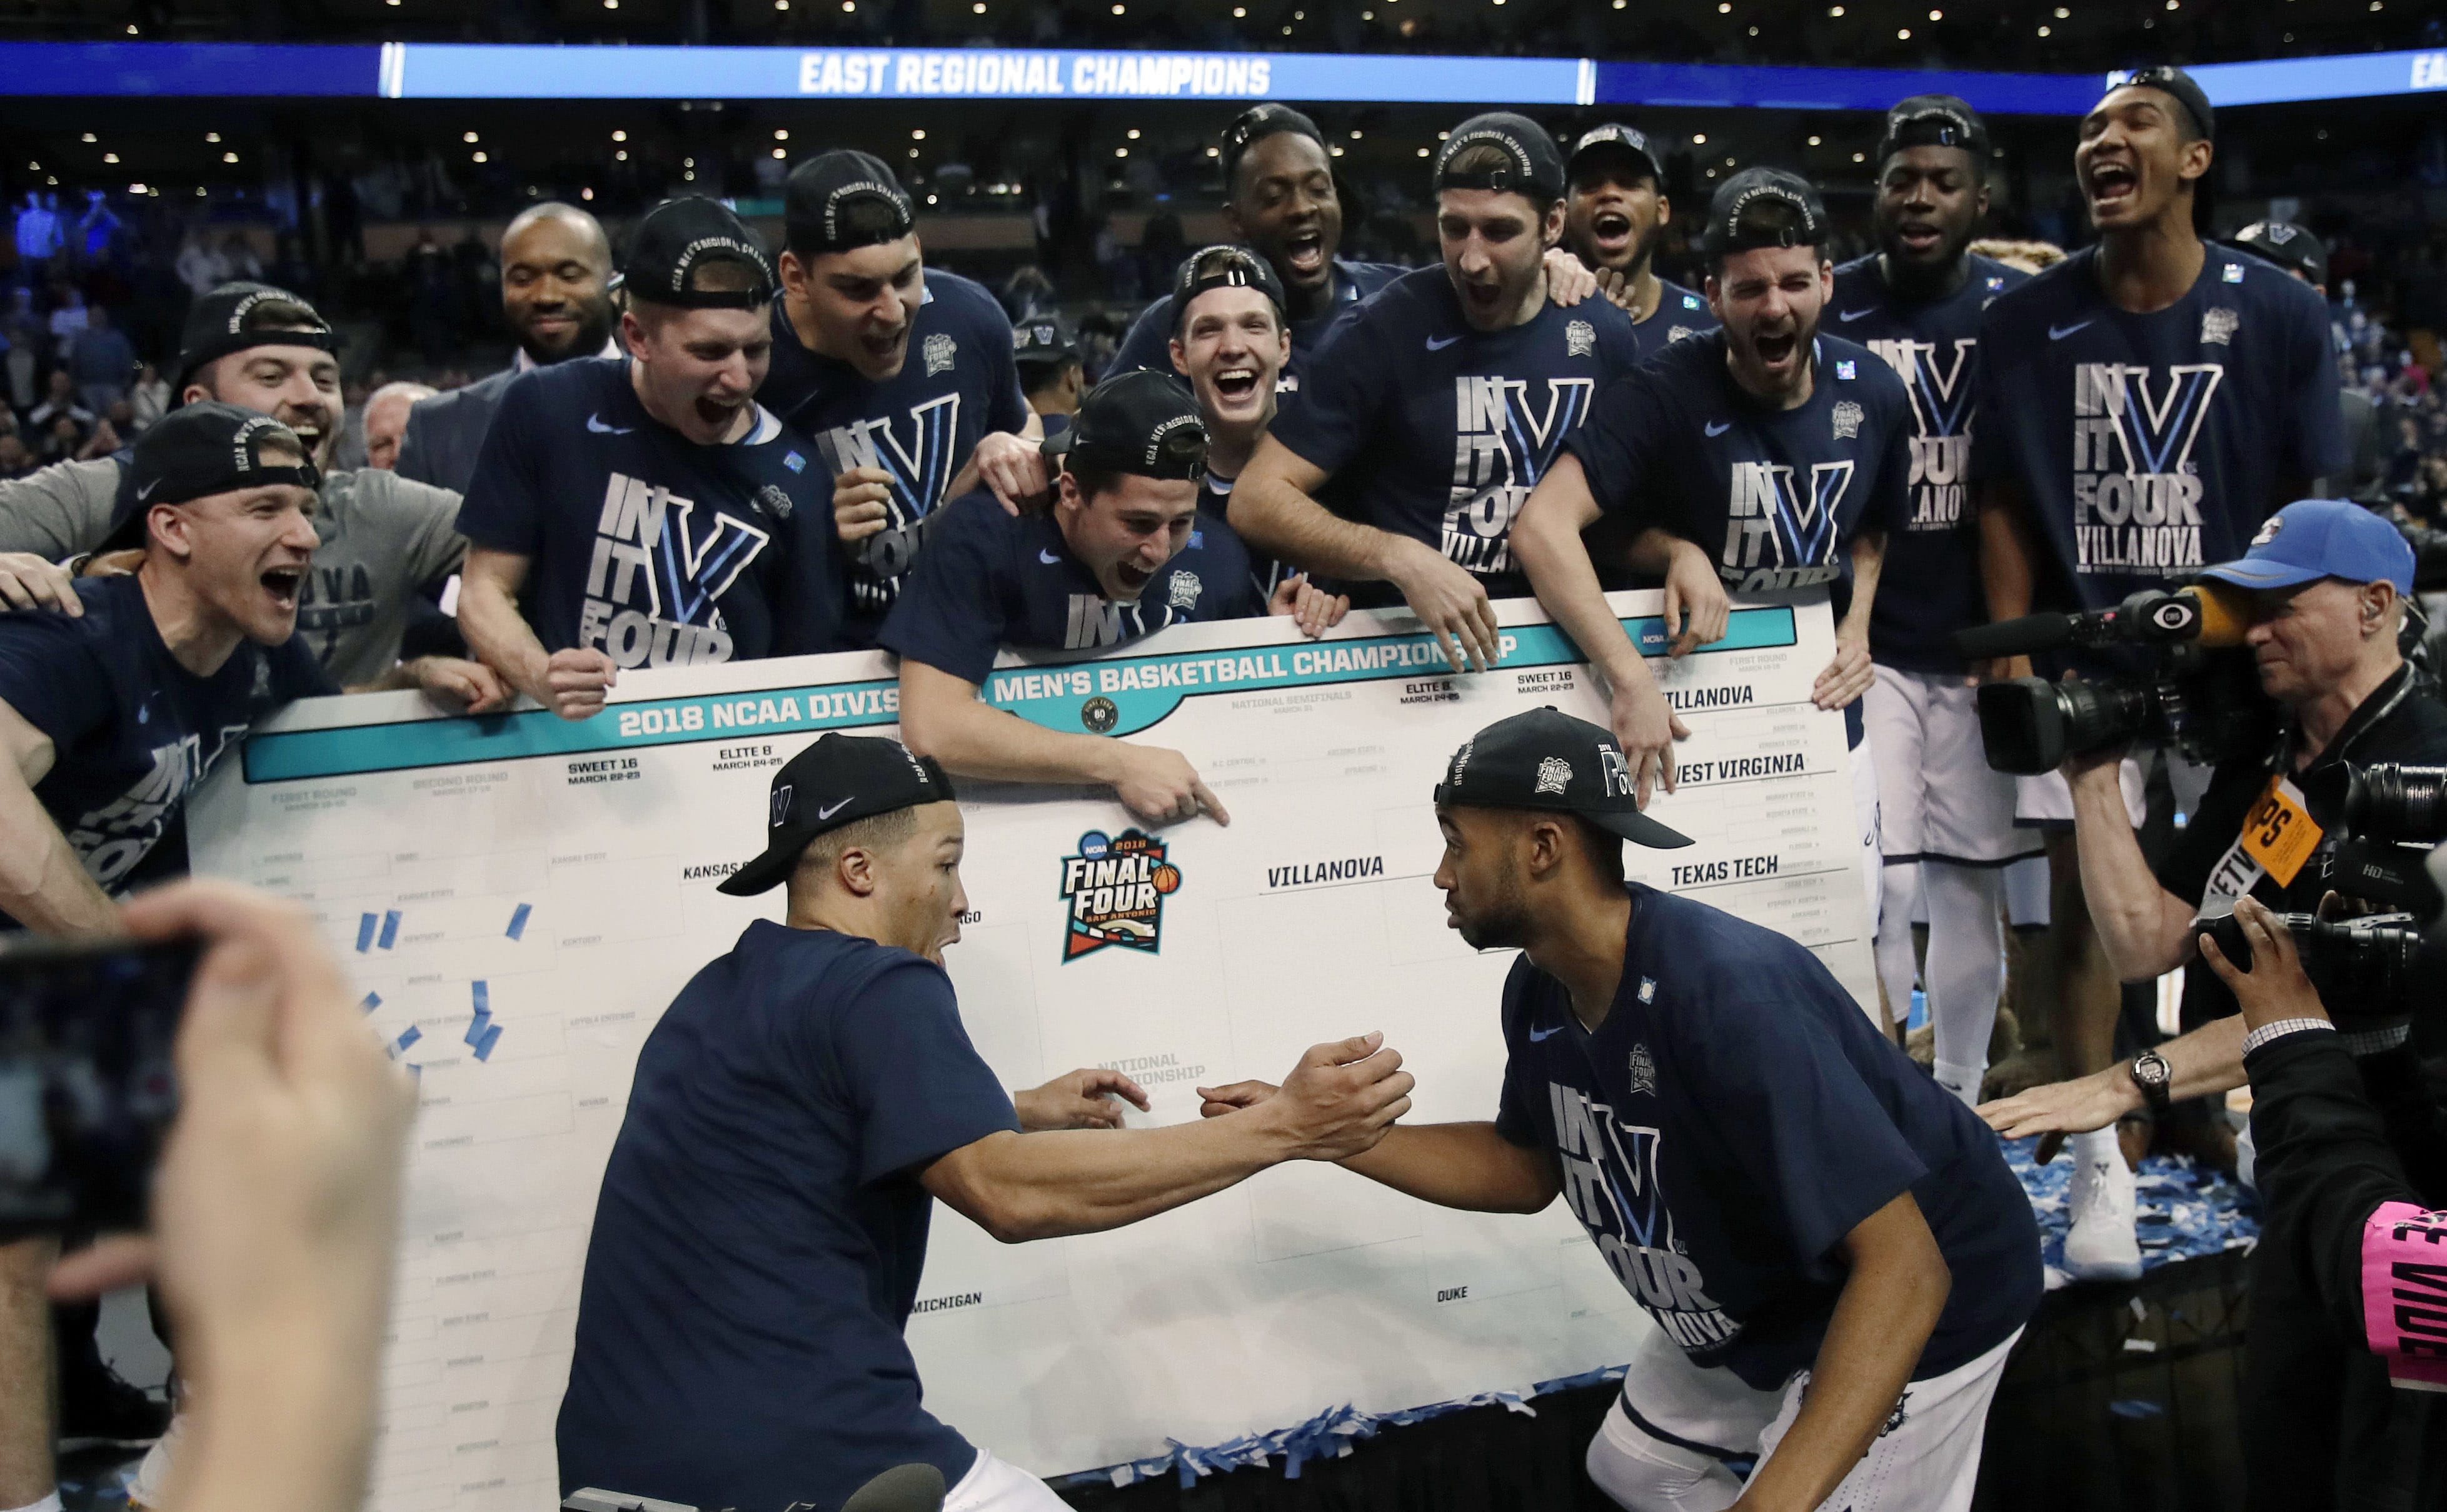 Villanova's Jalen Brunson, left, and Phil Booth, right, celebrate with teammates after affixing the team name on the bracket after beating Texas Tech in an NCAA men's college basketball tournament regional final, Sunday, March 25, 2018, in Boston. Villanova won 71-59 to advance to the Final Four.